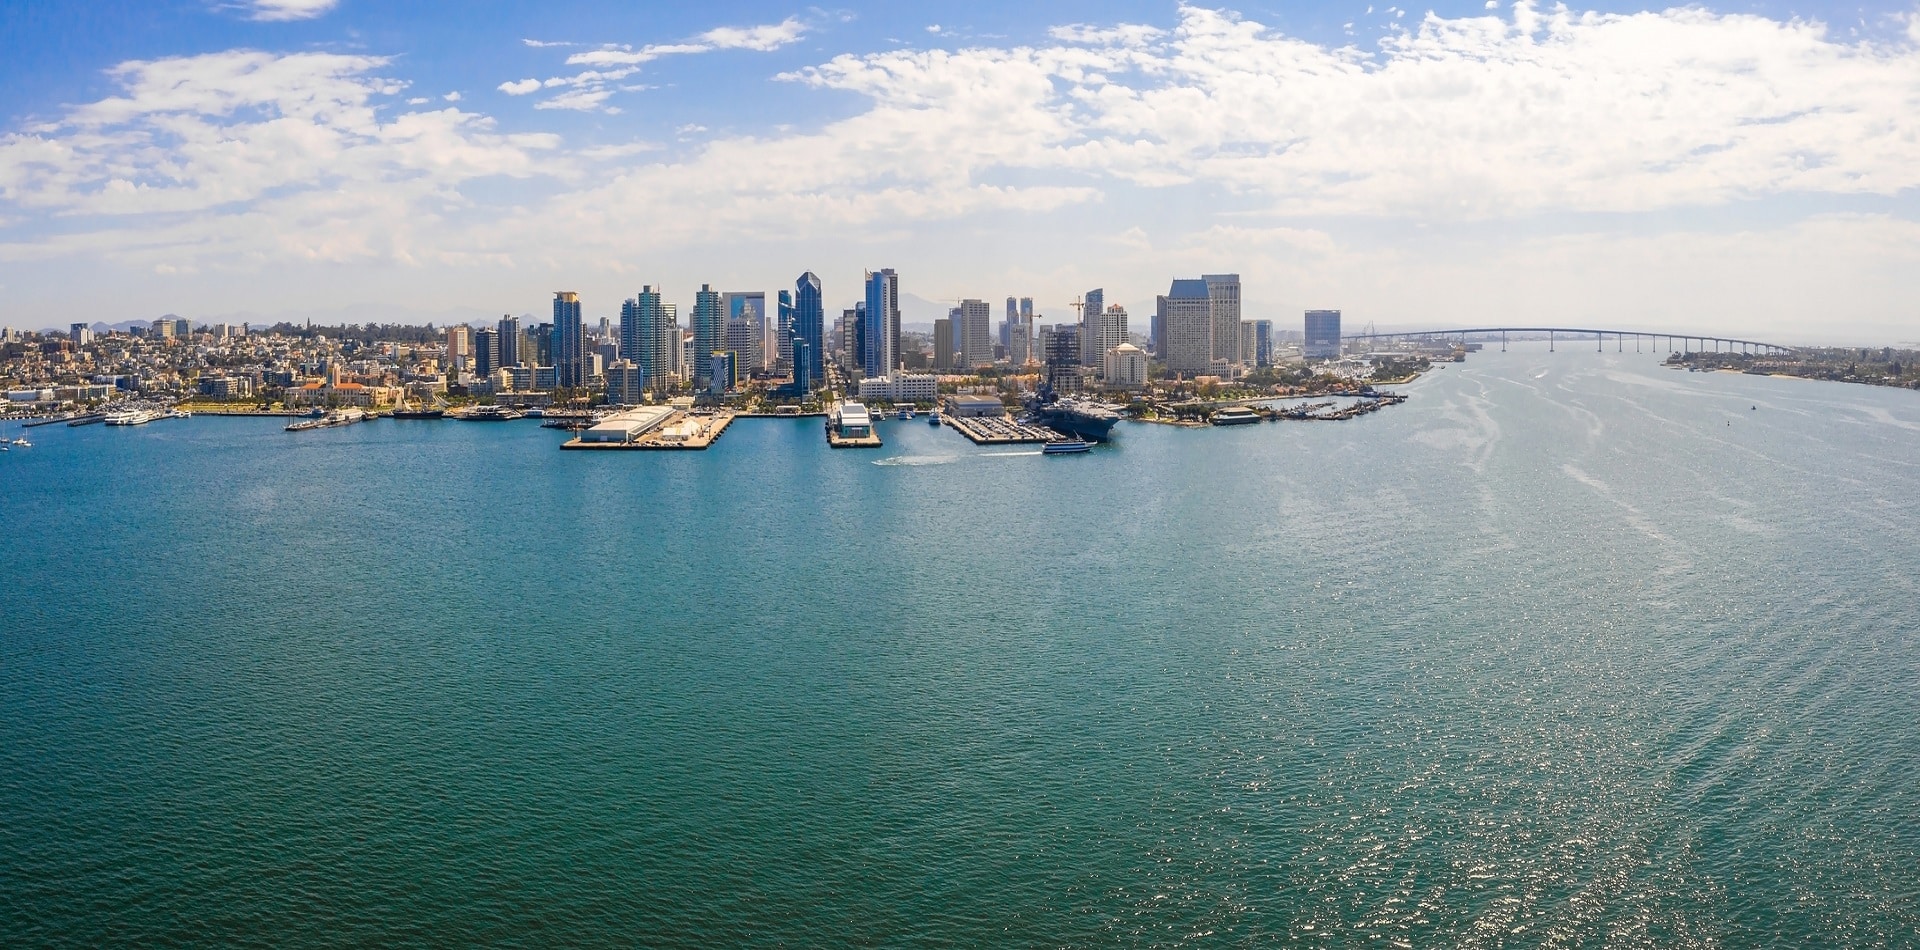 An aerial panoramic shot of the London city skyline near the water on a bright day